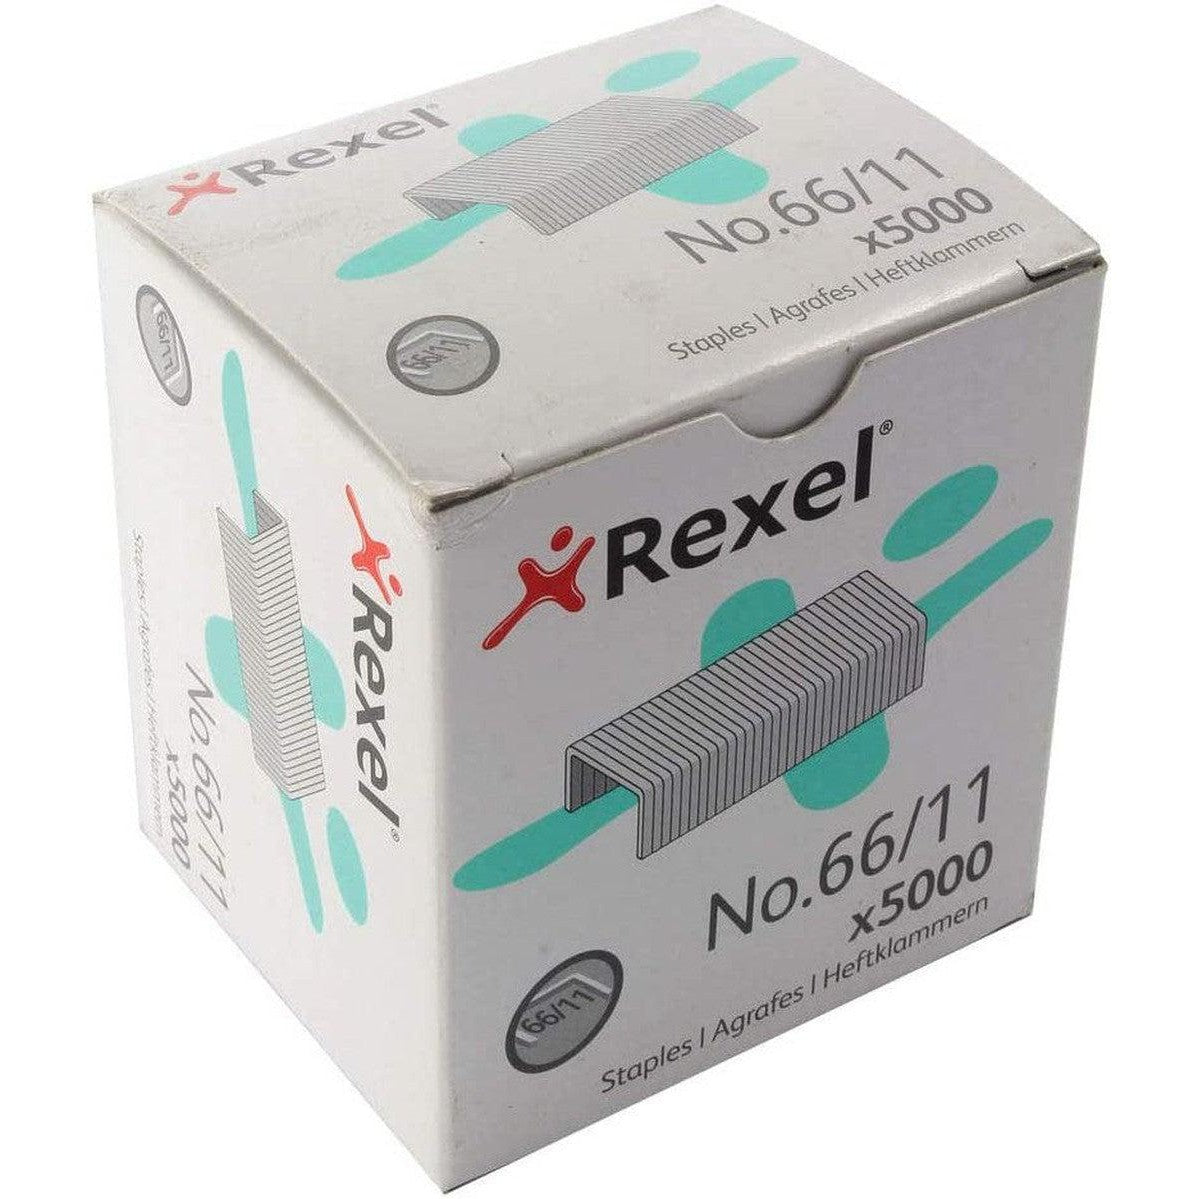 Rexel No.66/11 Mm Heavy Duty Staples-Stationery Staplers And Staples-Rexel-Star Light Kuwait